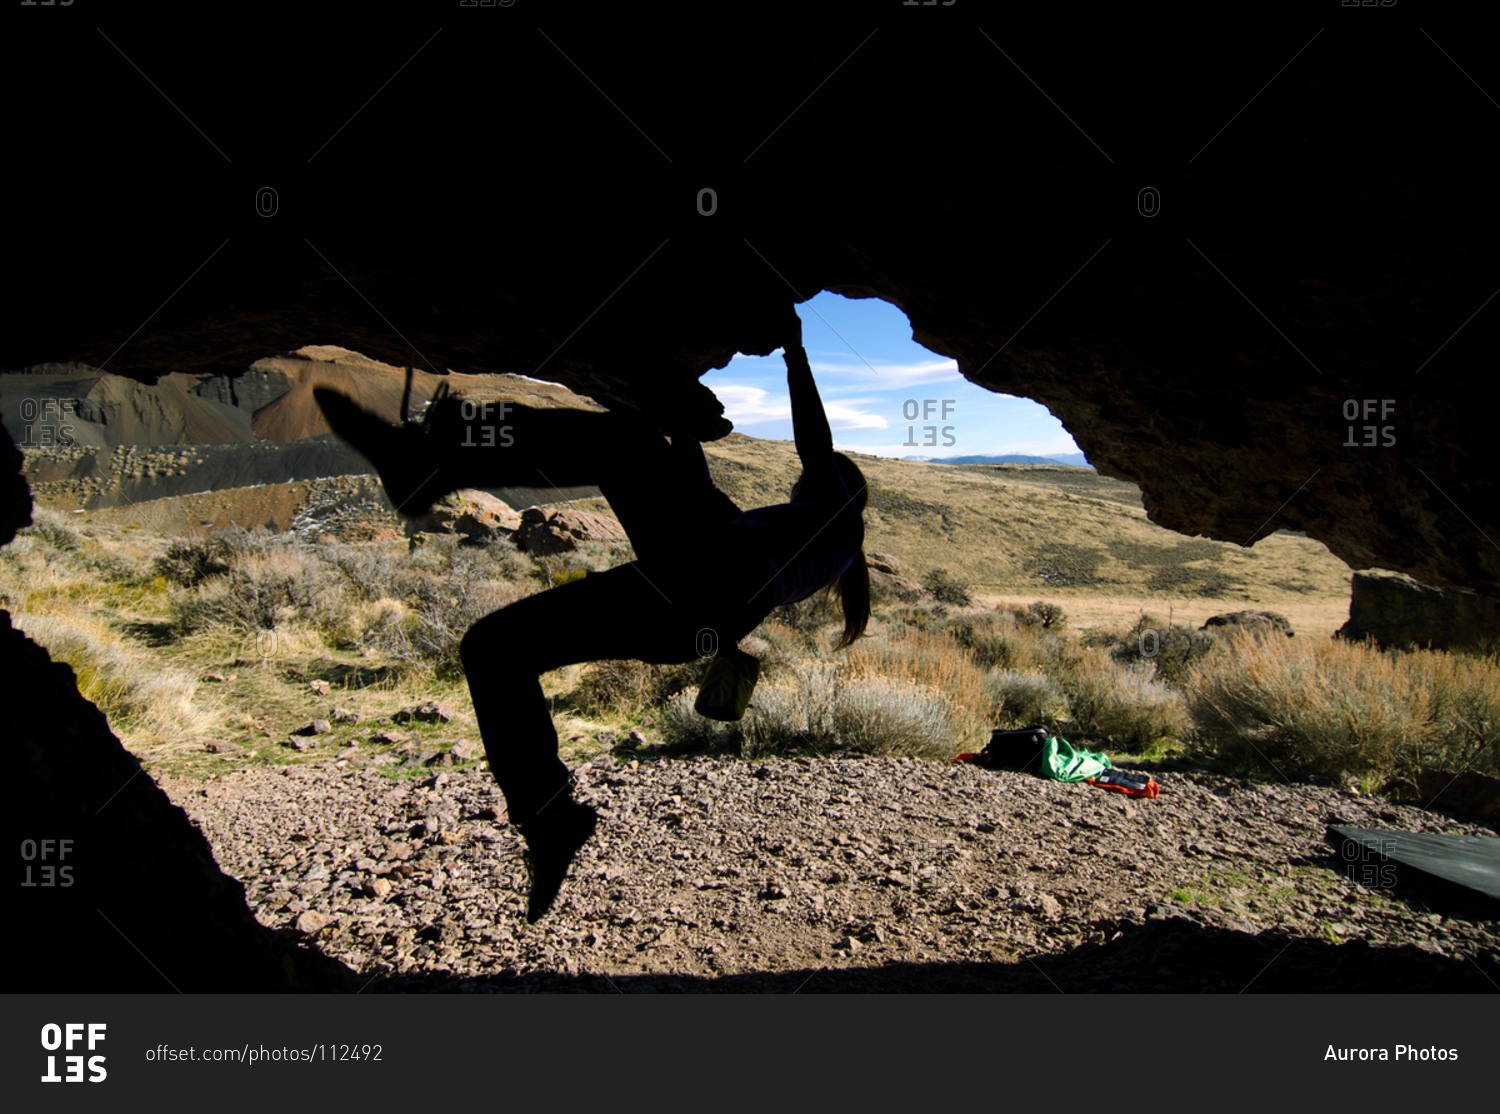 A silhouette of a woman bouldering in Washoe Valley, Nevada